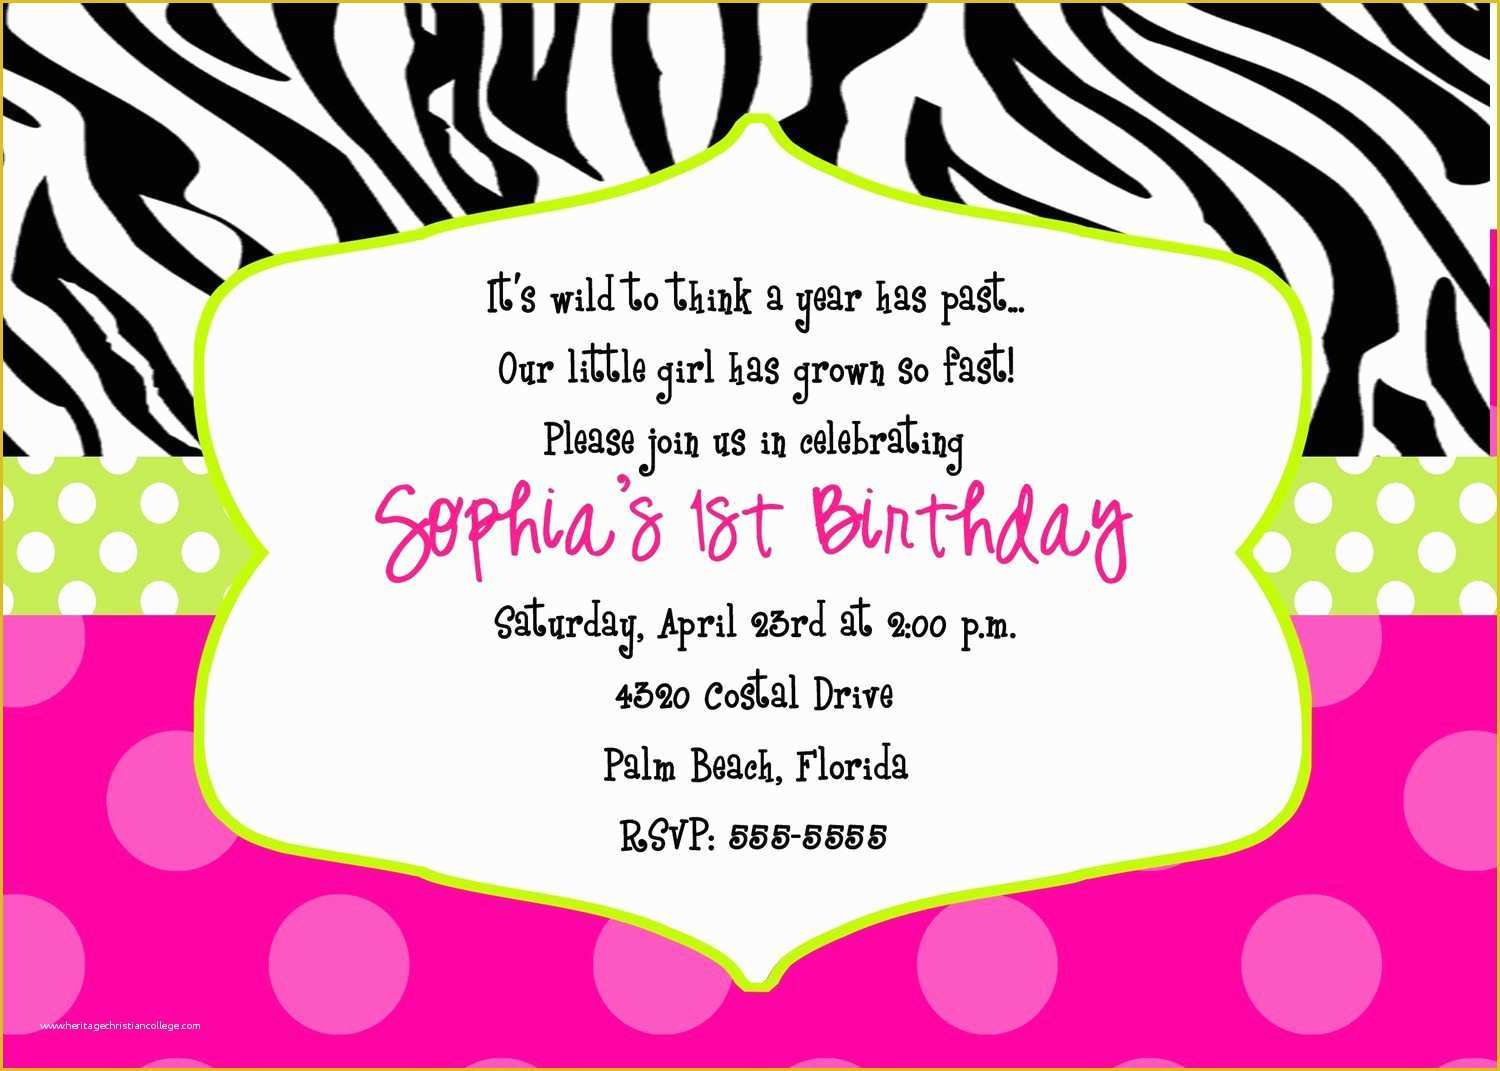 Free Birthday Invitation Templates for Adults Of Free Printable Birthday Invitation Templates for Adults